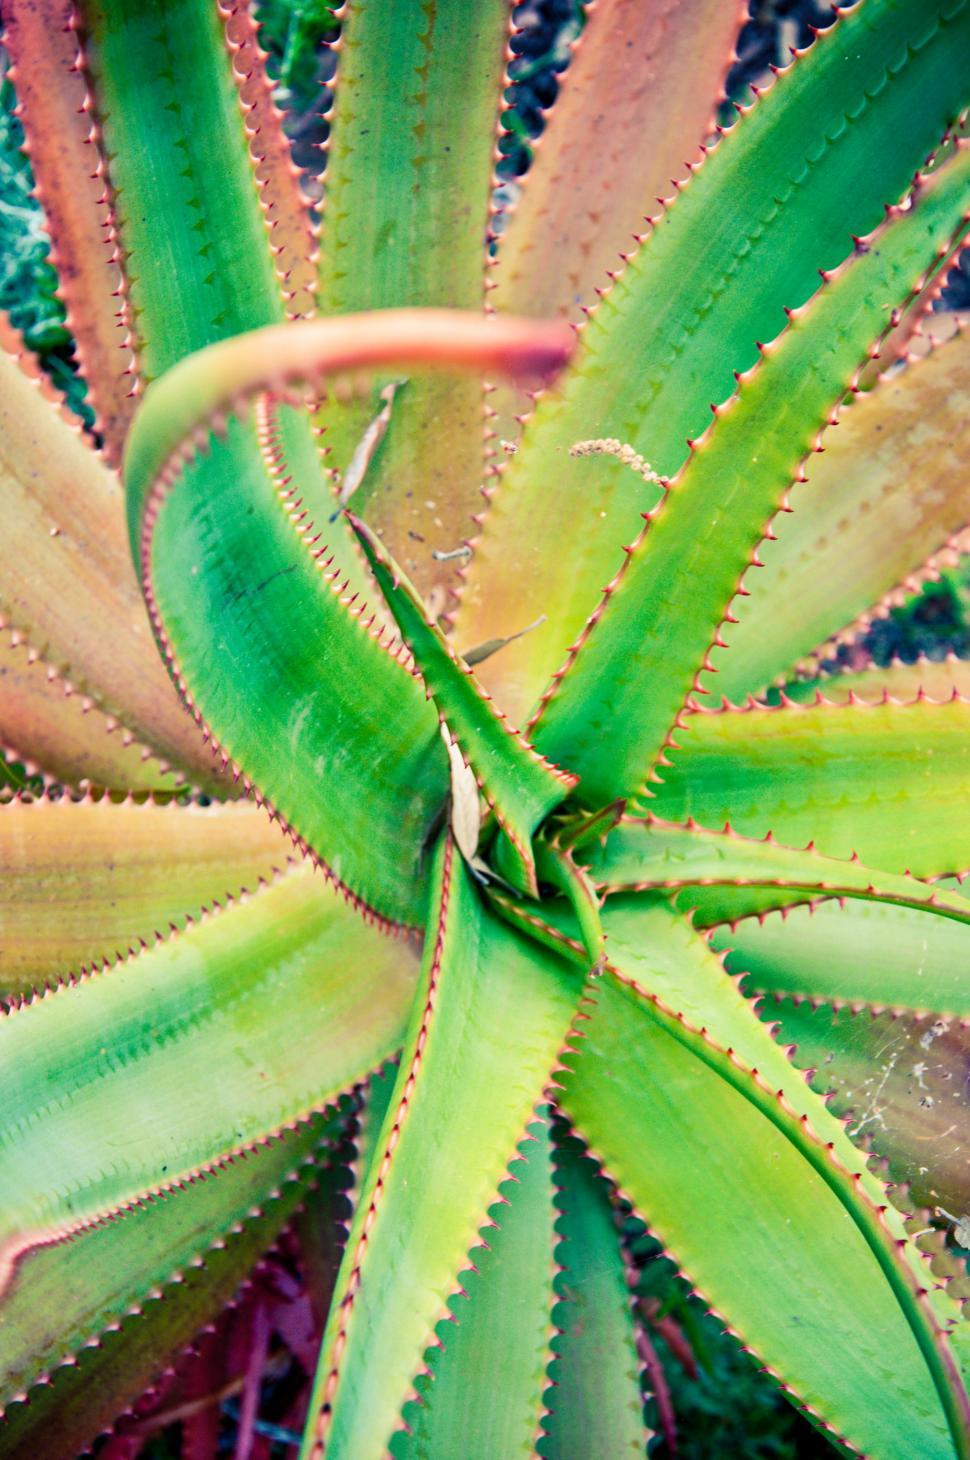 Free Image of Green agave leaves cactus plant 